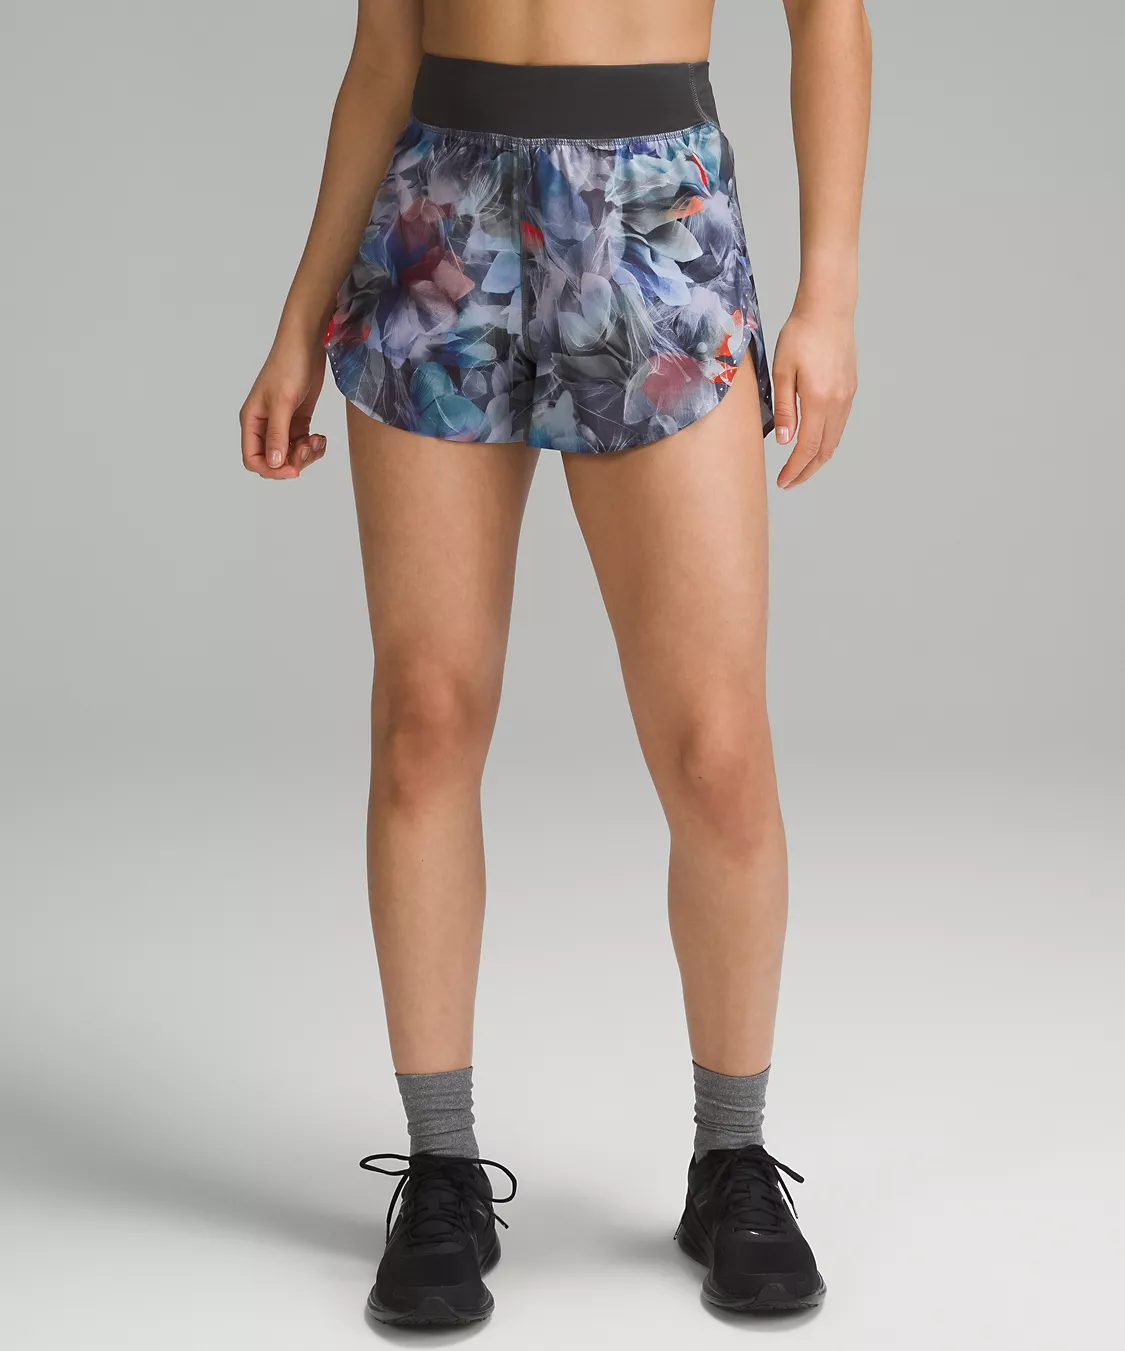 Fast and Free Reflective High-Rise Classic-Fit Short 3" lululemon we made too much womens